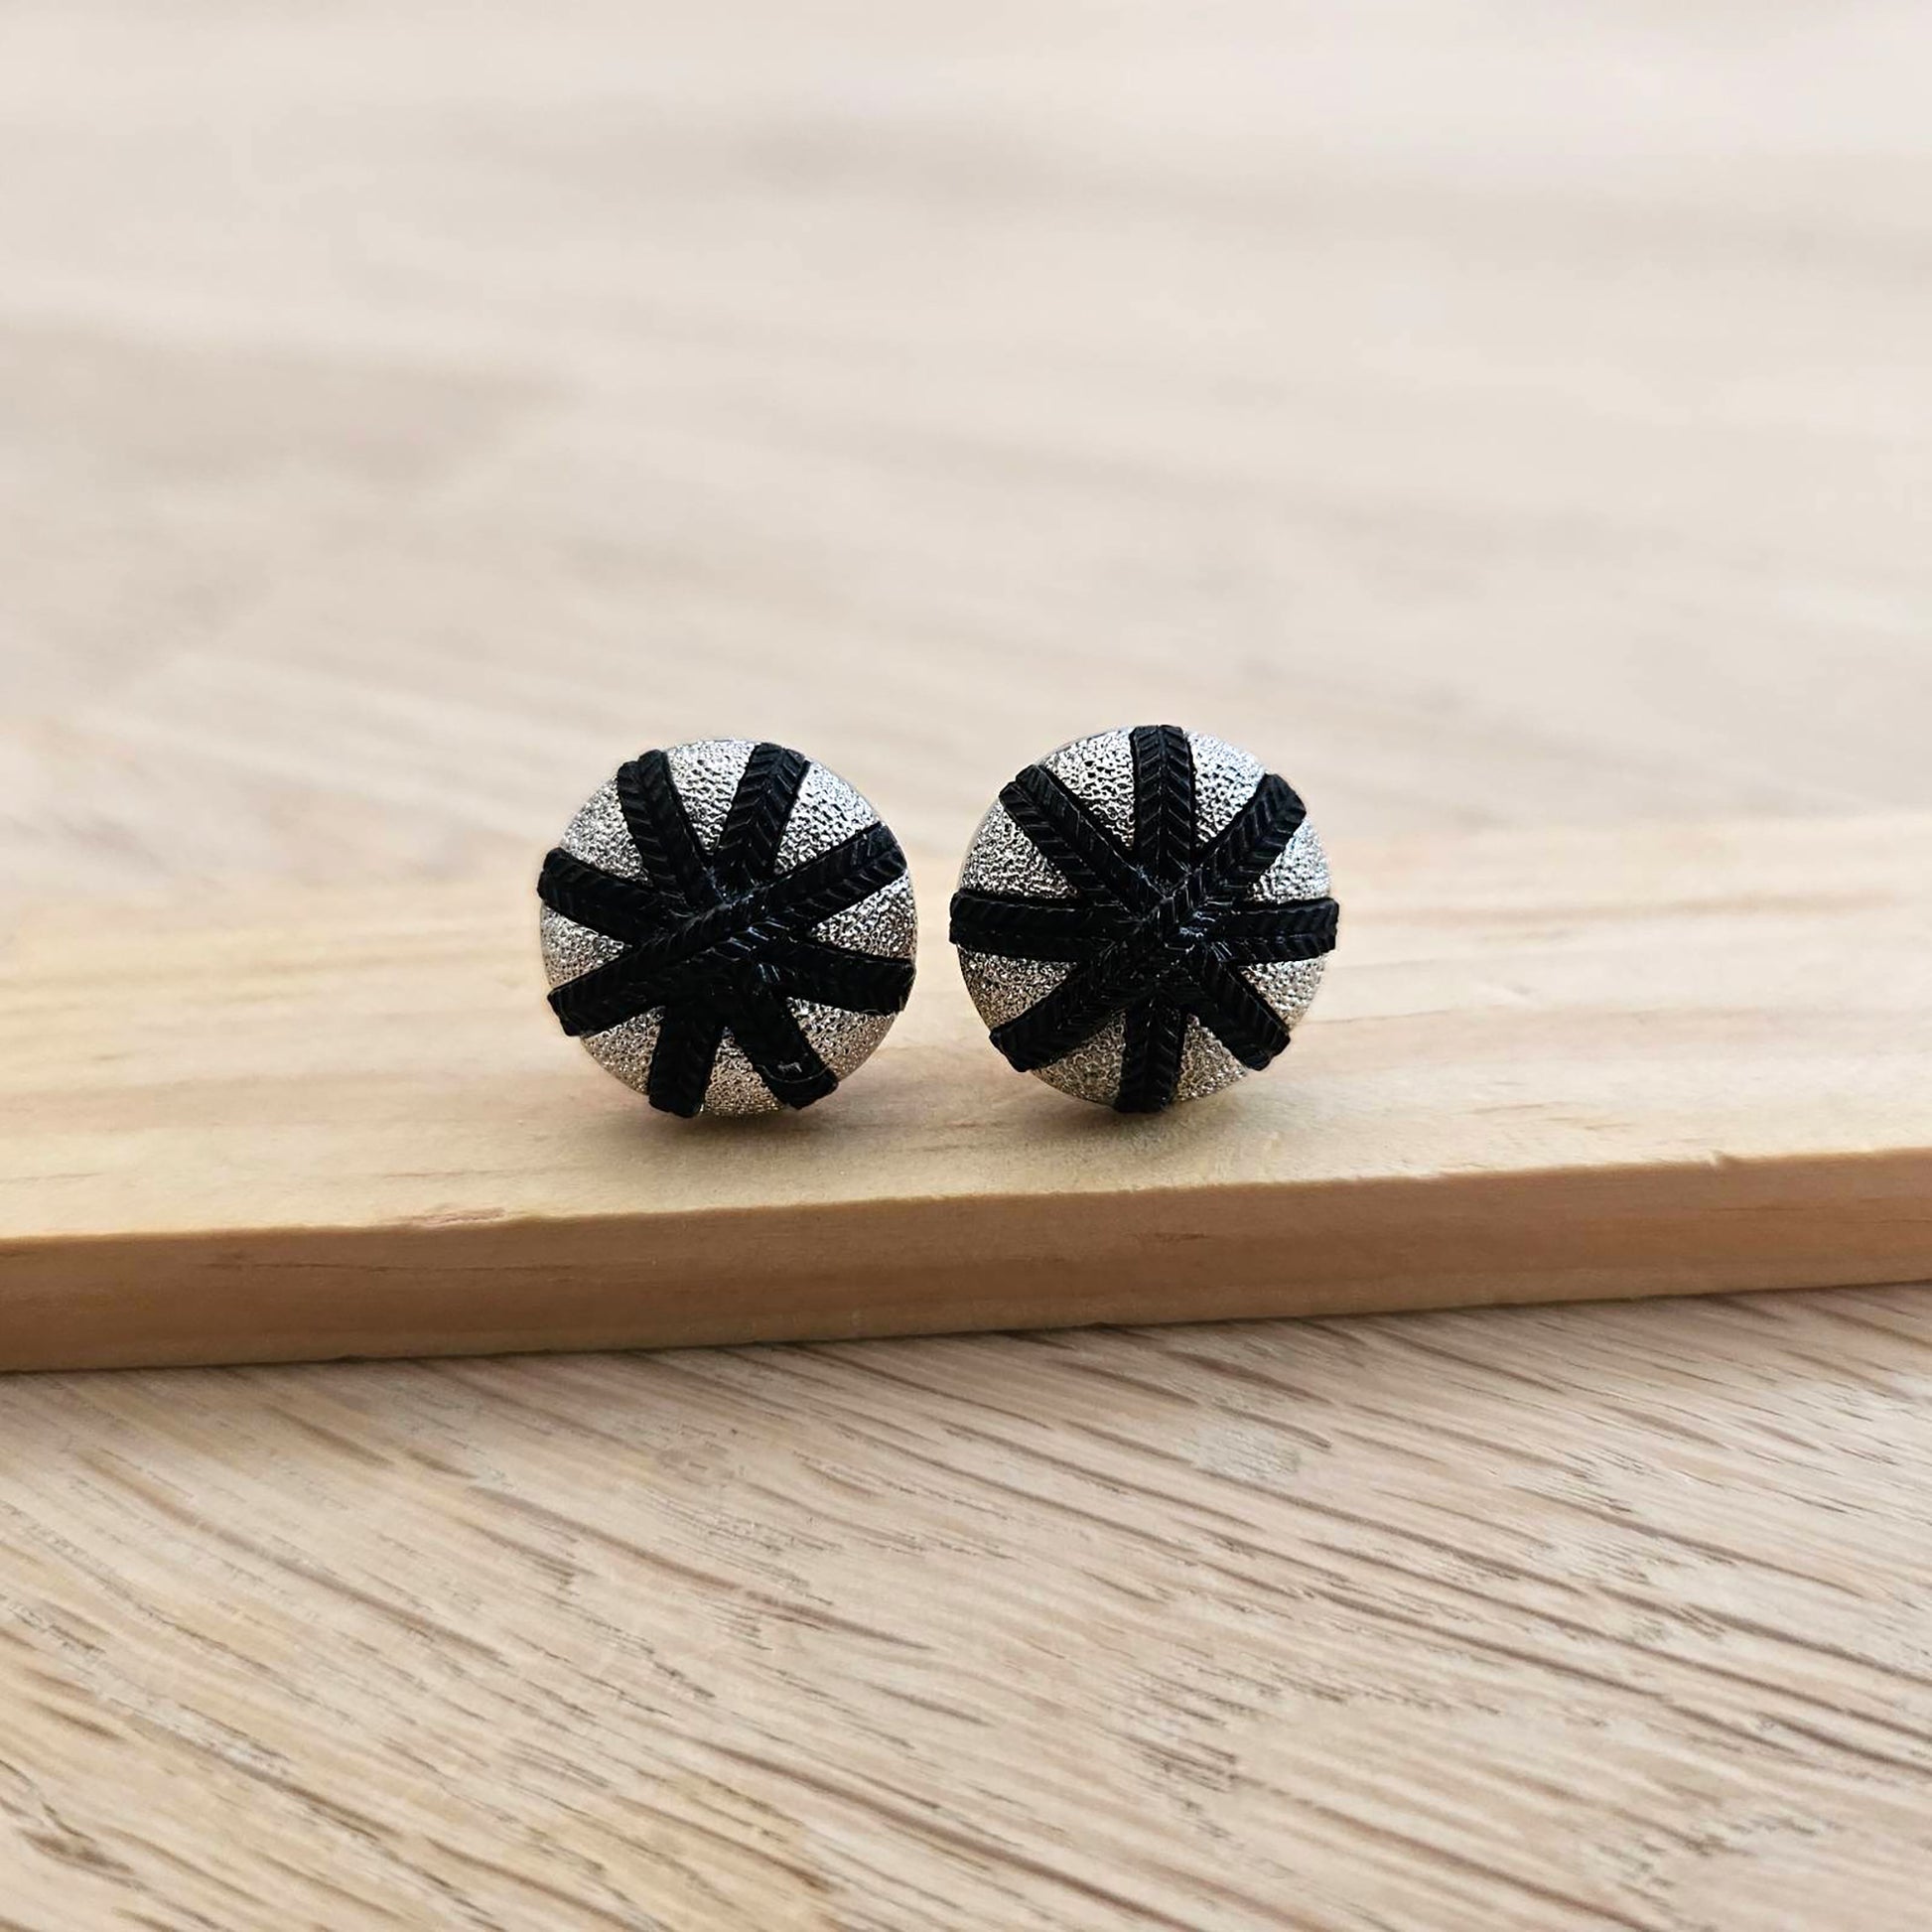 Star Stud earrings, Round Black Silver post, Recycled vintage button